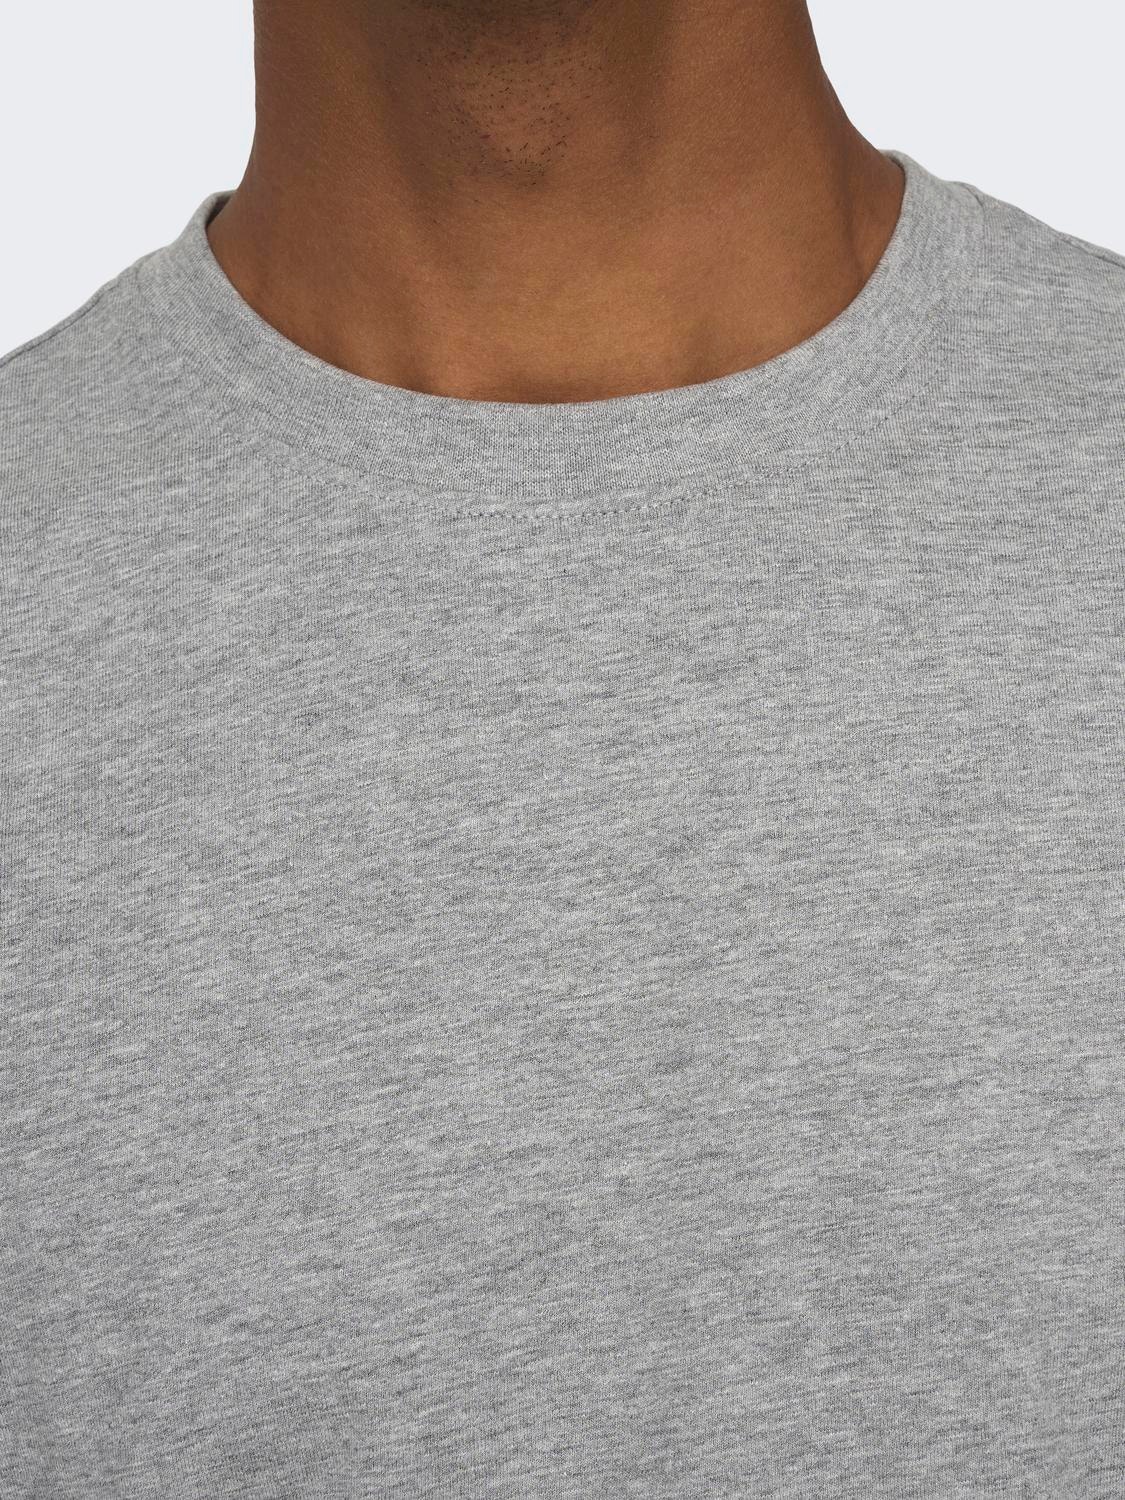 ONLY & SONS Relaxed Fit Round Neck T-Shirt -Light Grey Melange - 22022532